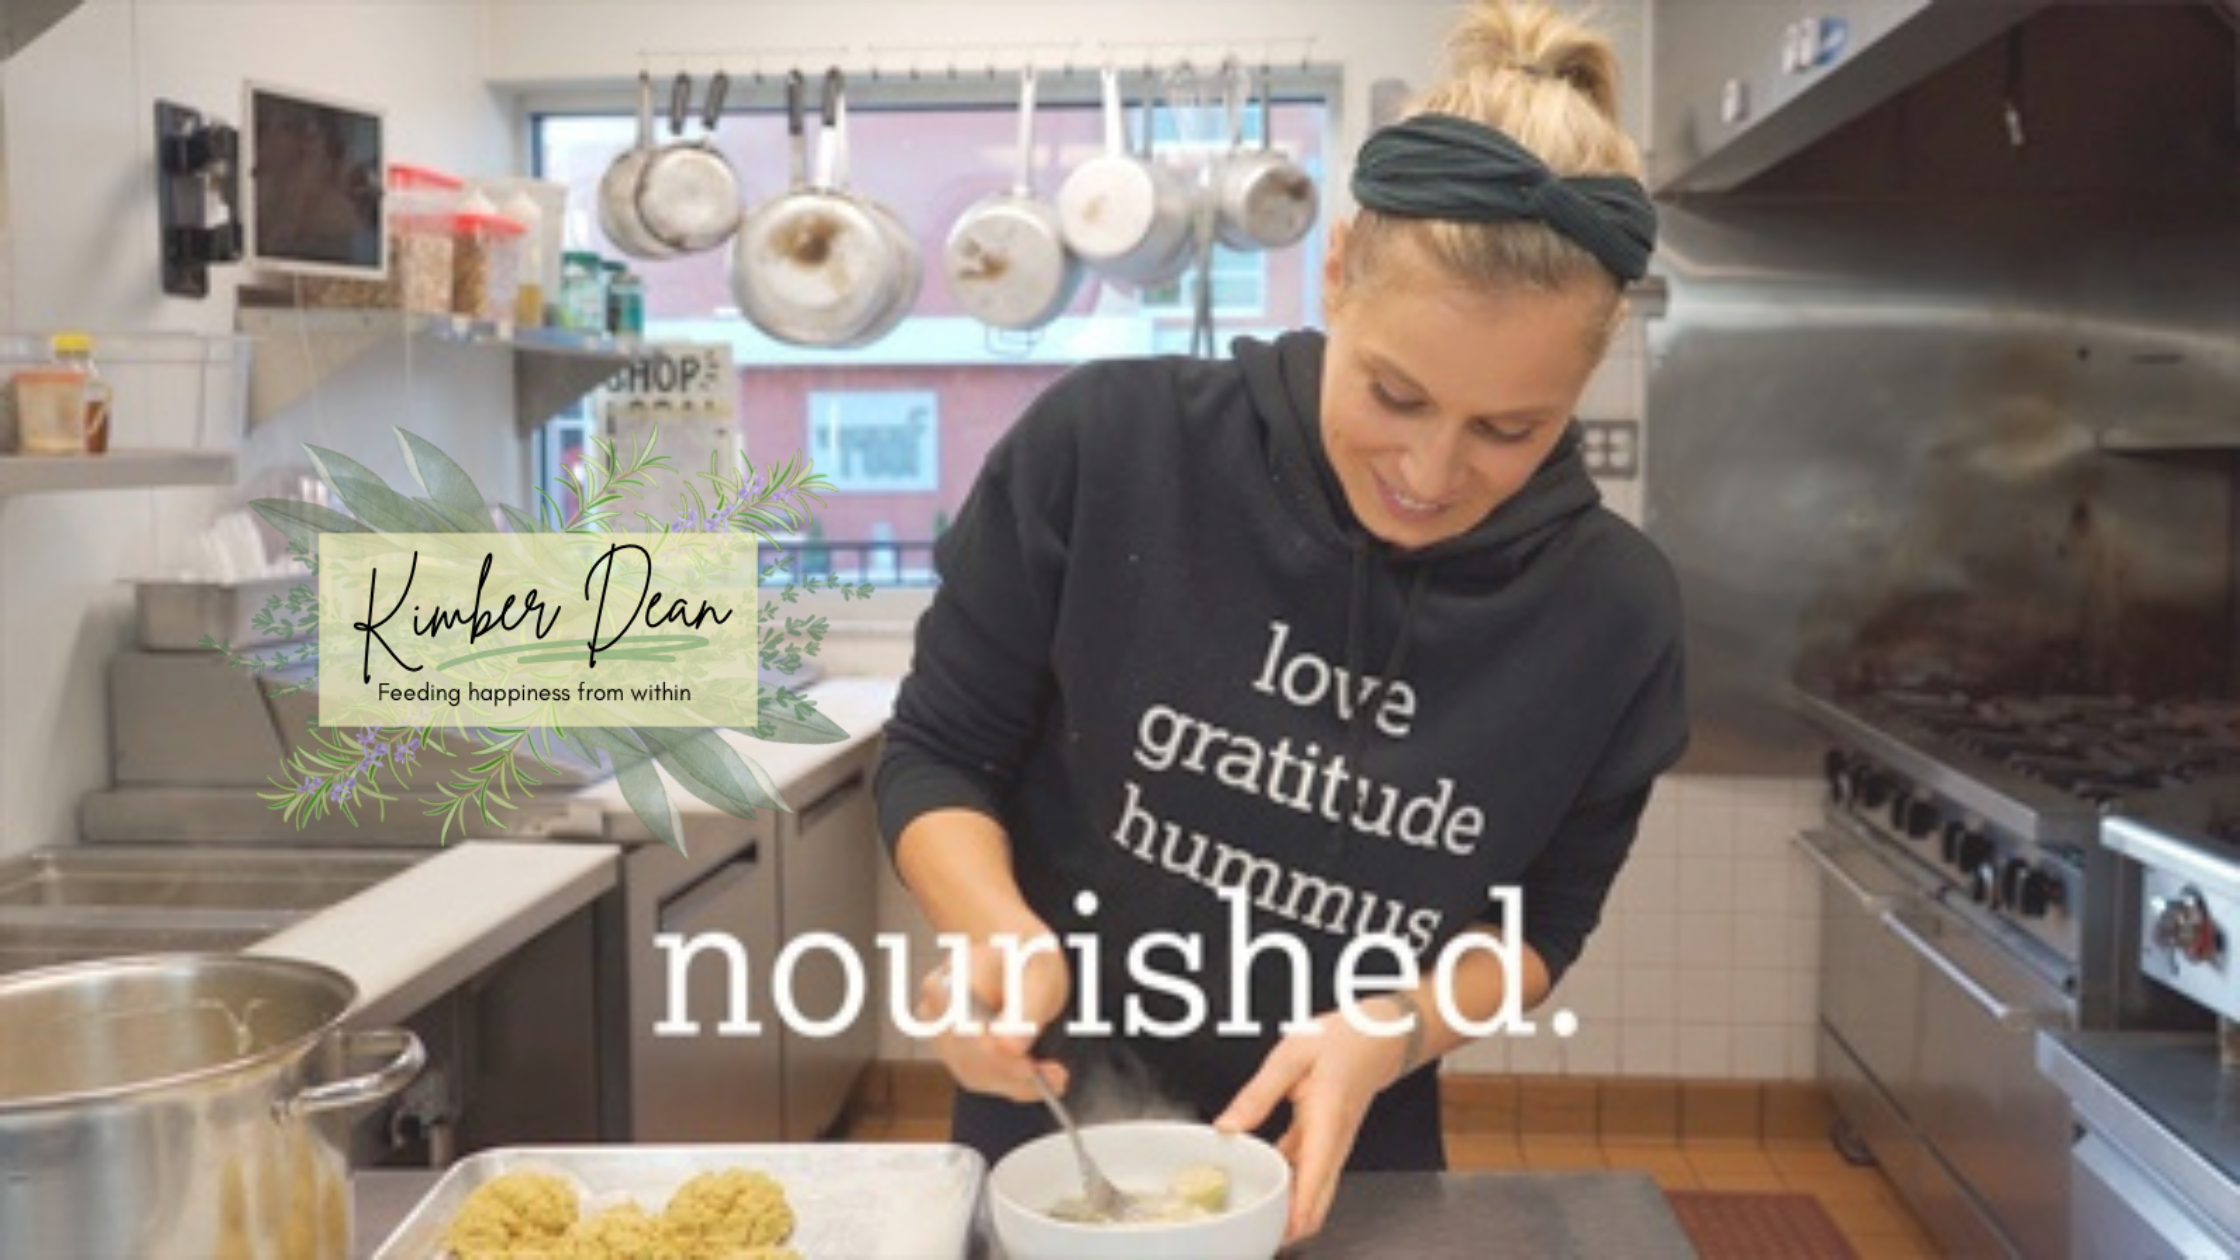 Stay Connected: Sign Up for Chef Kimber Dean’s Newsletter Today!